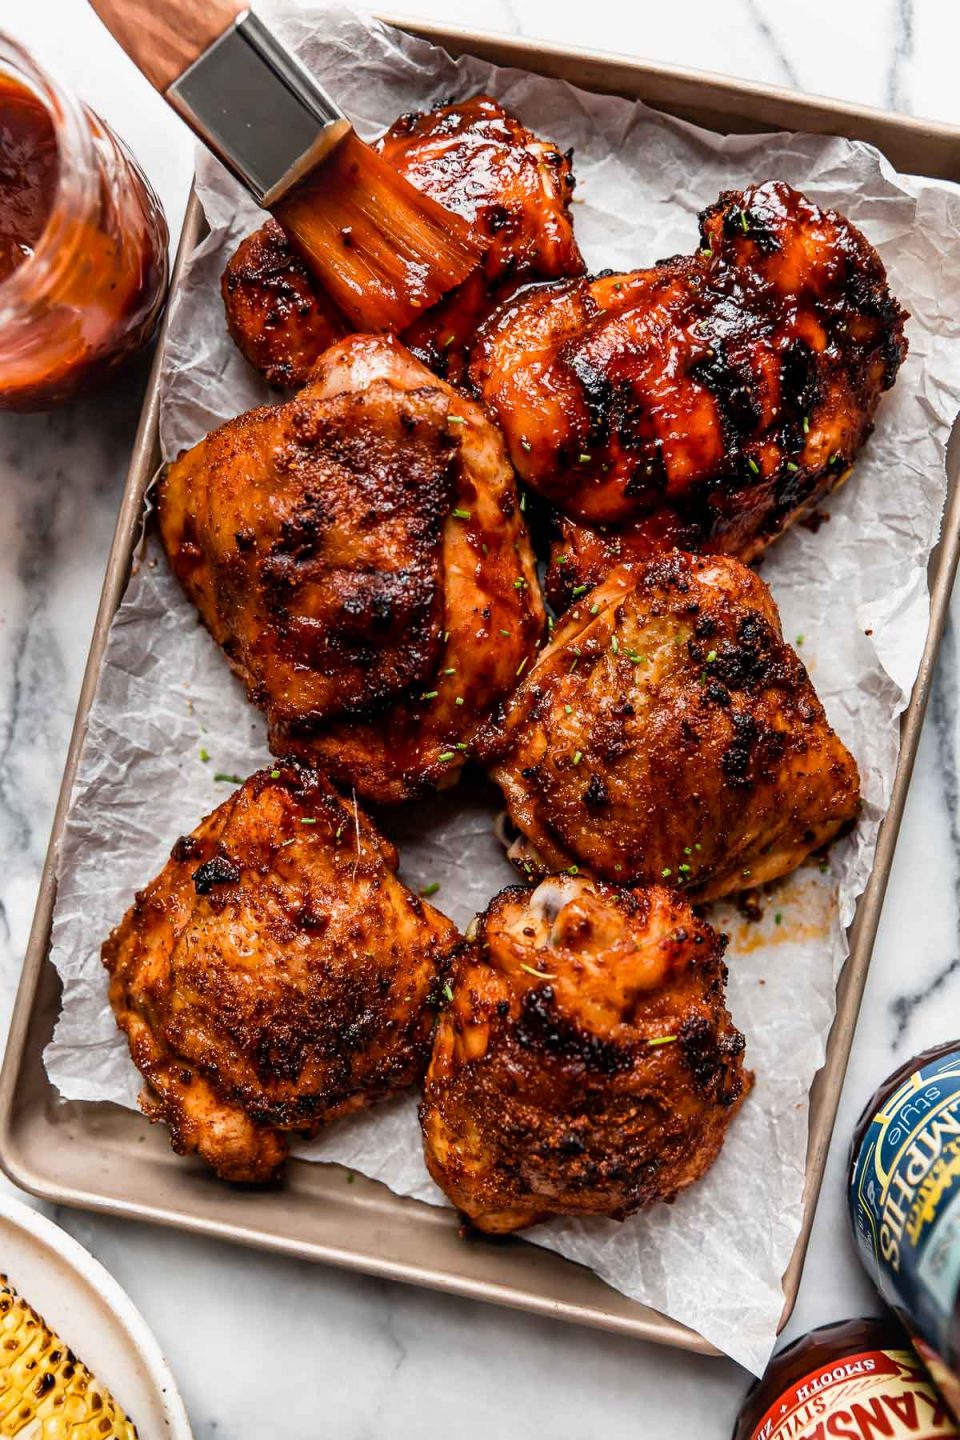 6 grilled BBQ chicken thighs on a small baking sheet. Some of the chicken pieces have crispy skin. Others are slathered in BBQ sauce. A pastry brush is reaching in from outside of the frame, brushing even more BBQ sauce on the barbecue chicken. 